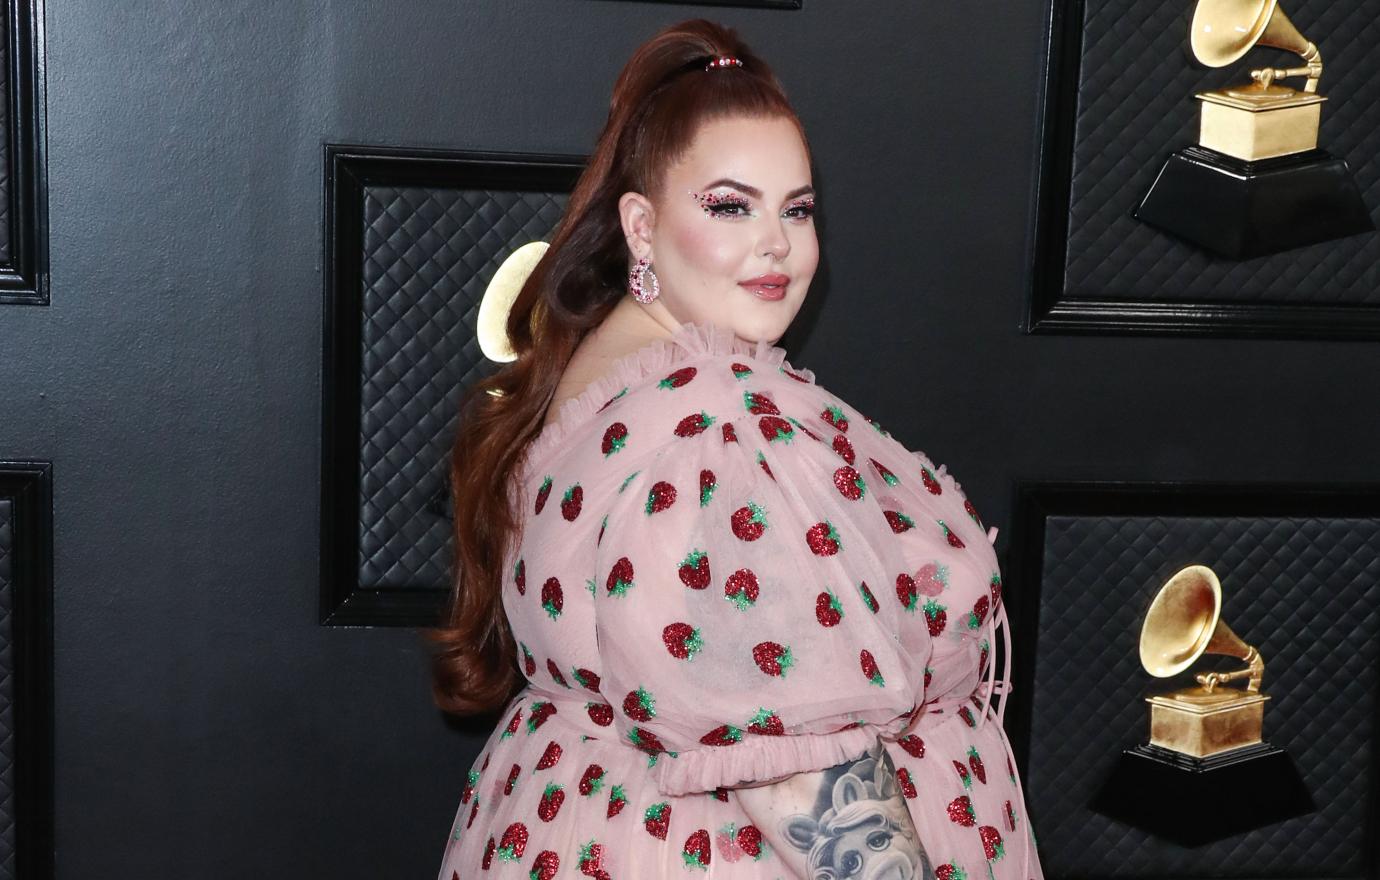 Tess Holliday on Her Anorexia Recovery: 'People Said I Was Lying